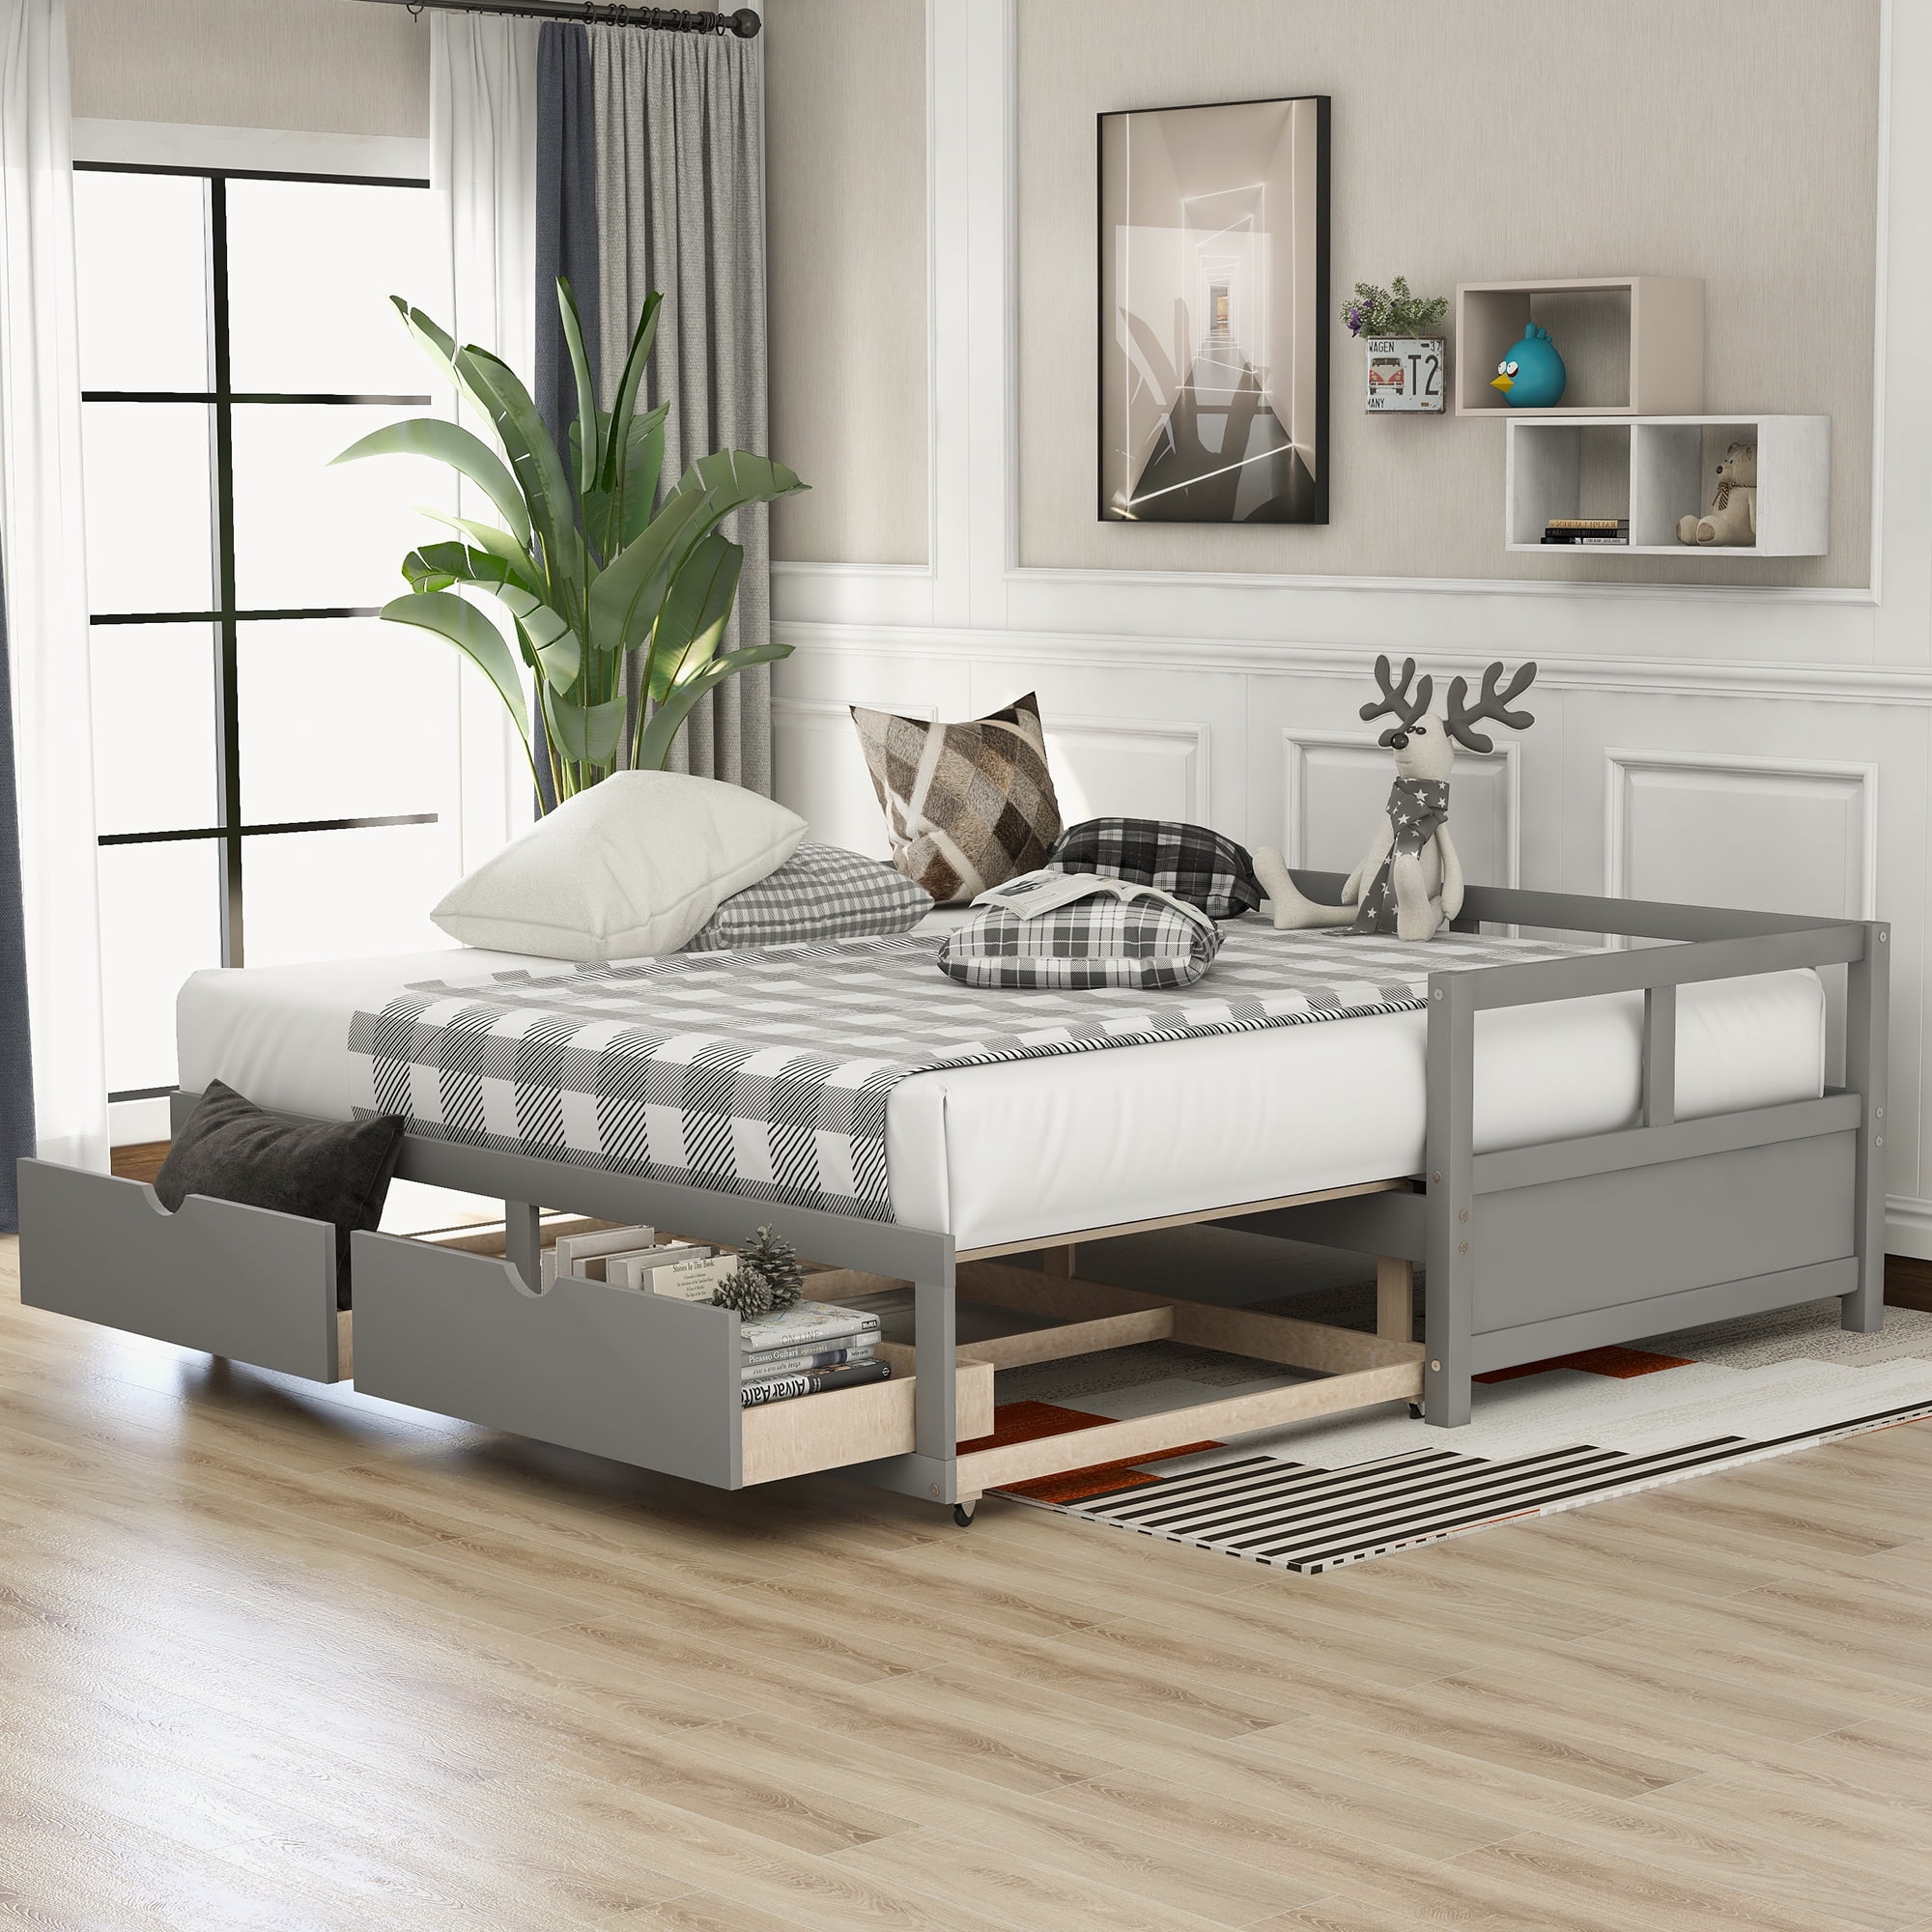 Twin Daybed With Two Storage Drawers, Twin Trundle Bed Set